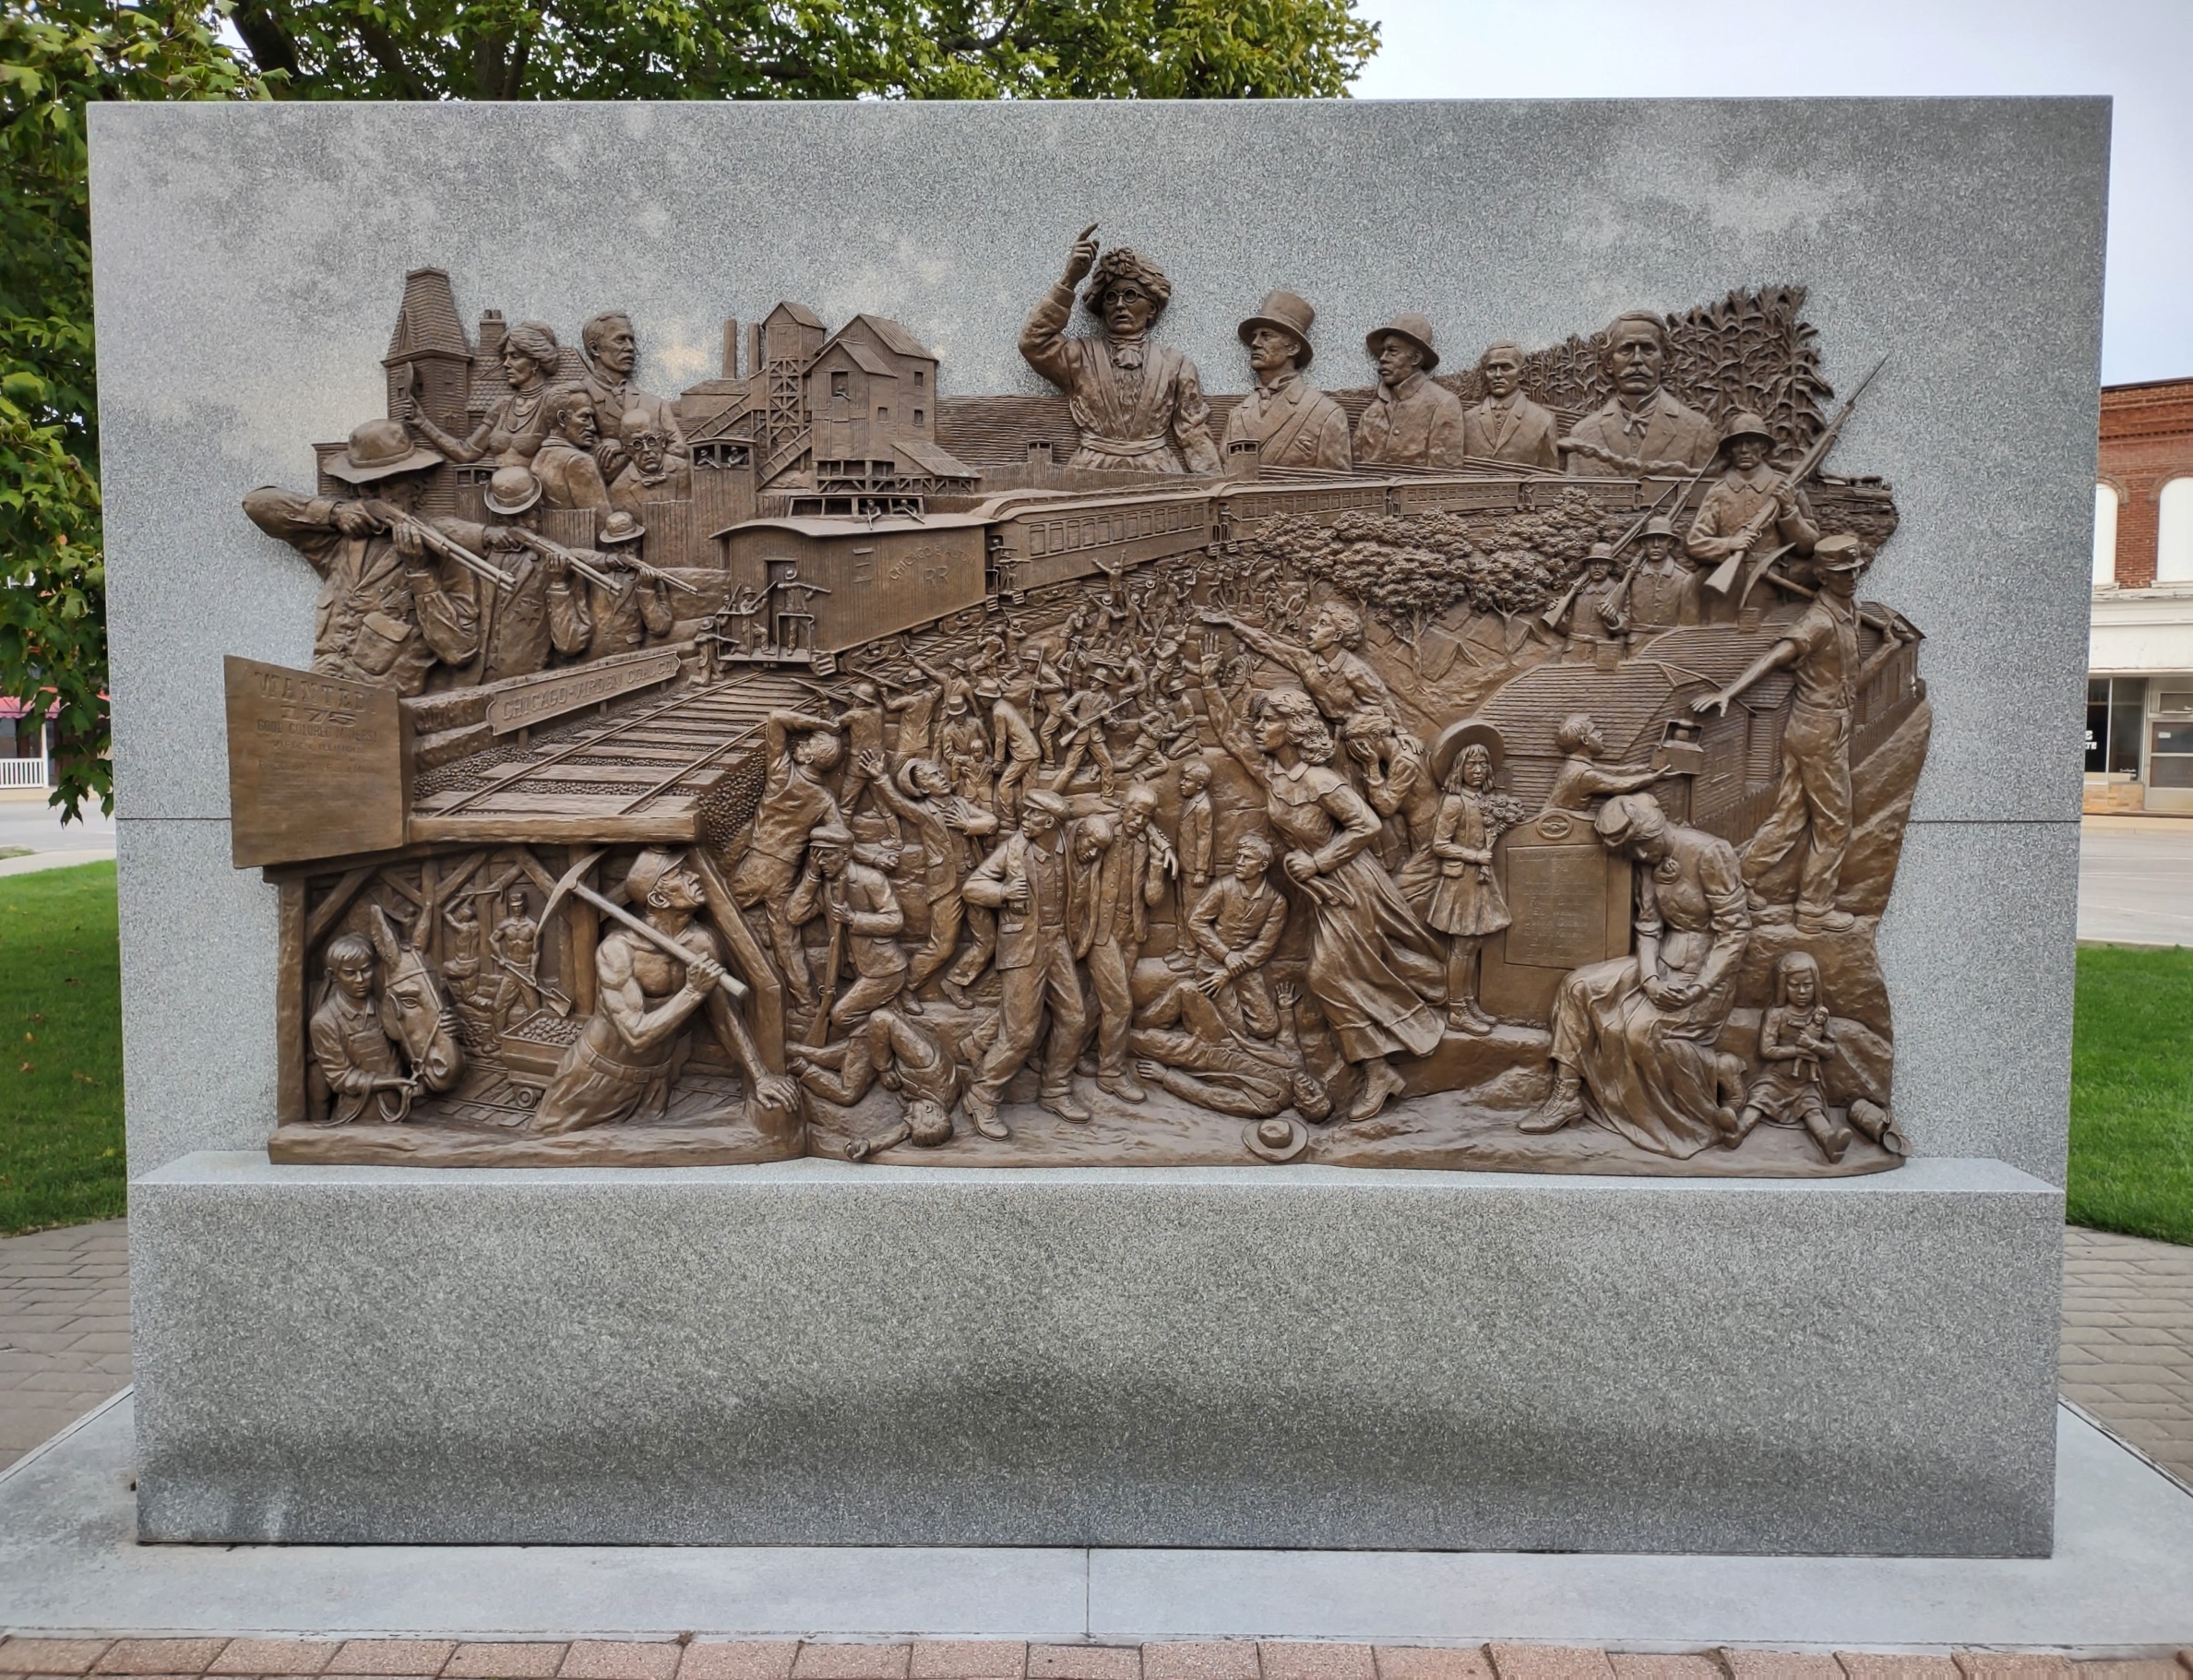 Photograph of "Battle of Virden" by David Seagraves, a bronze relief sculpture commemorating the conflict of the same name.